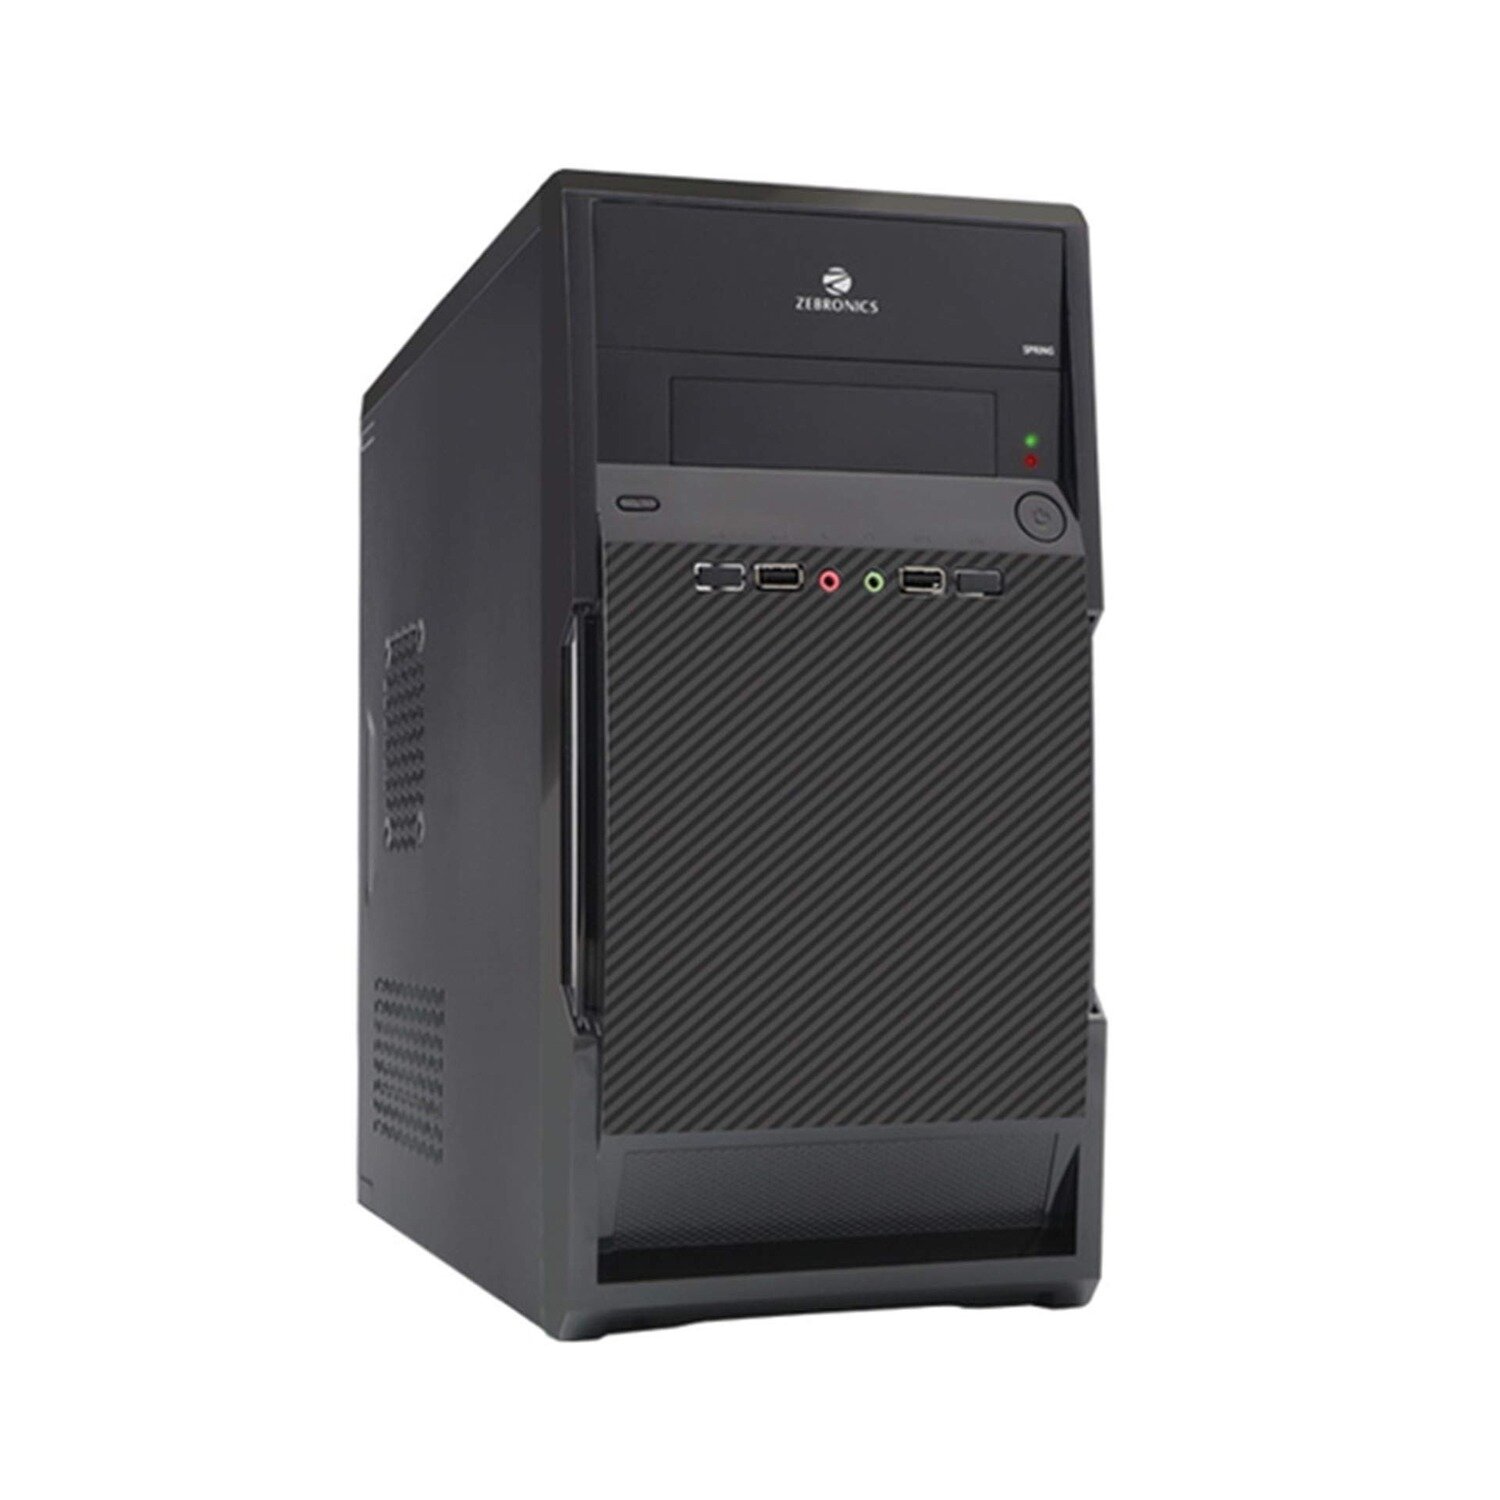 Core I5-650 3.2Ghz Desktop PC for Home & Office - 8GB RAM / 120GB SSD / 500GB HDD